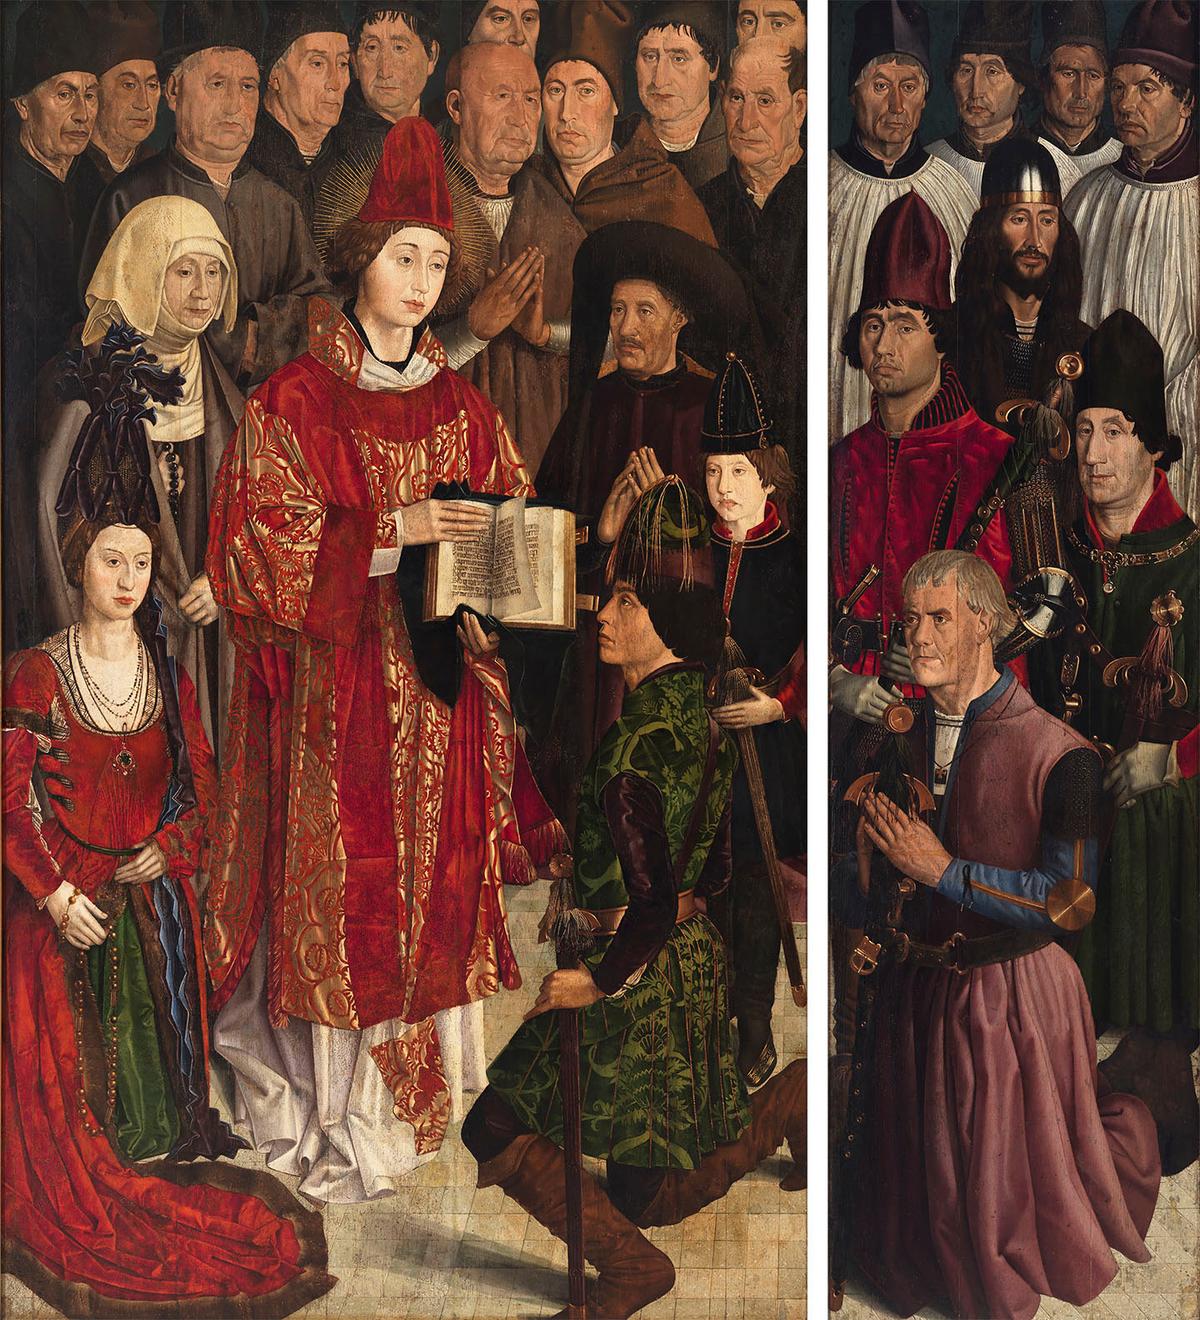 The left image is the left central panel from the "St. Vincent Panels." St. Vincent, clad in red and gold and holding a manuscript, stands in the center surrounded by figures in Portuguese society. The image on the right is from the fifth panel with painted figures of friars, monks, knights, and nobility. (Courtesy of the National Antique Art Museum in Lisbon)